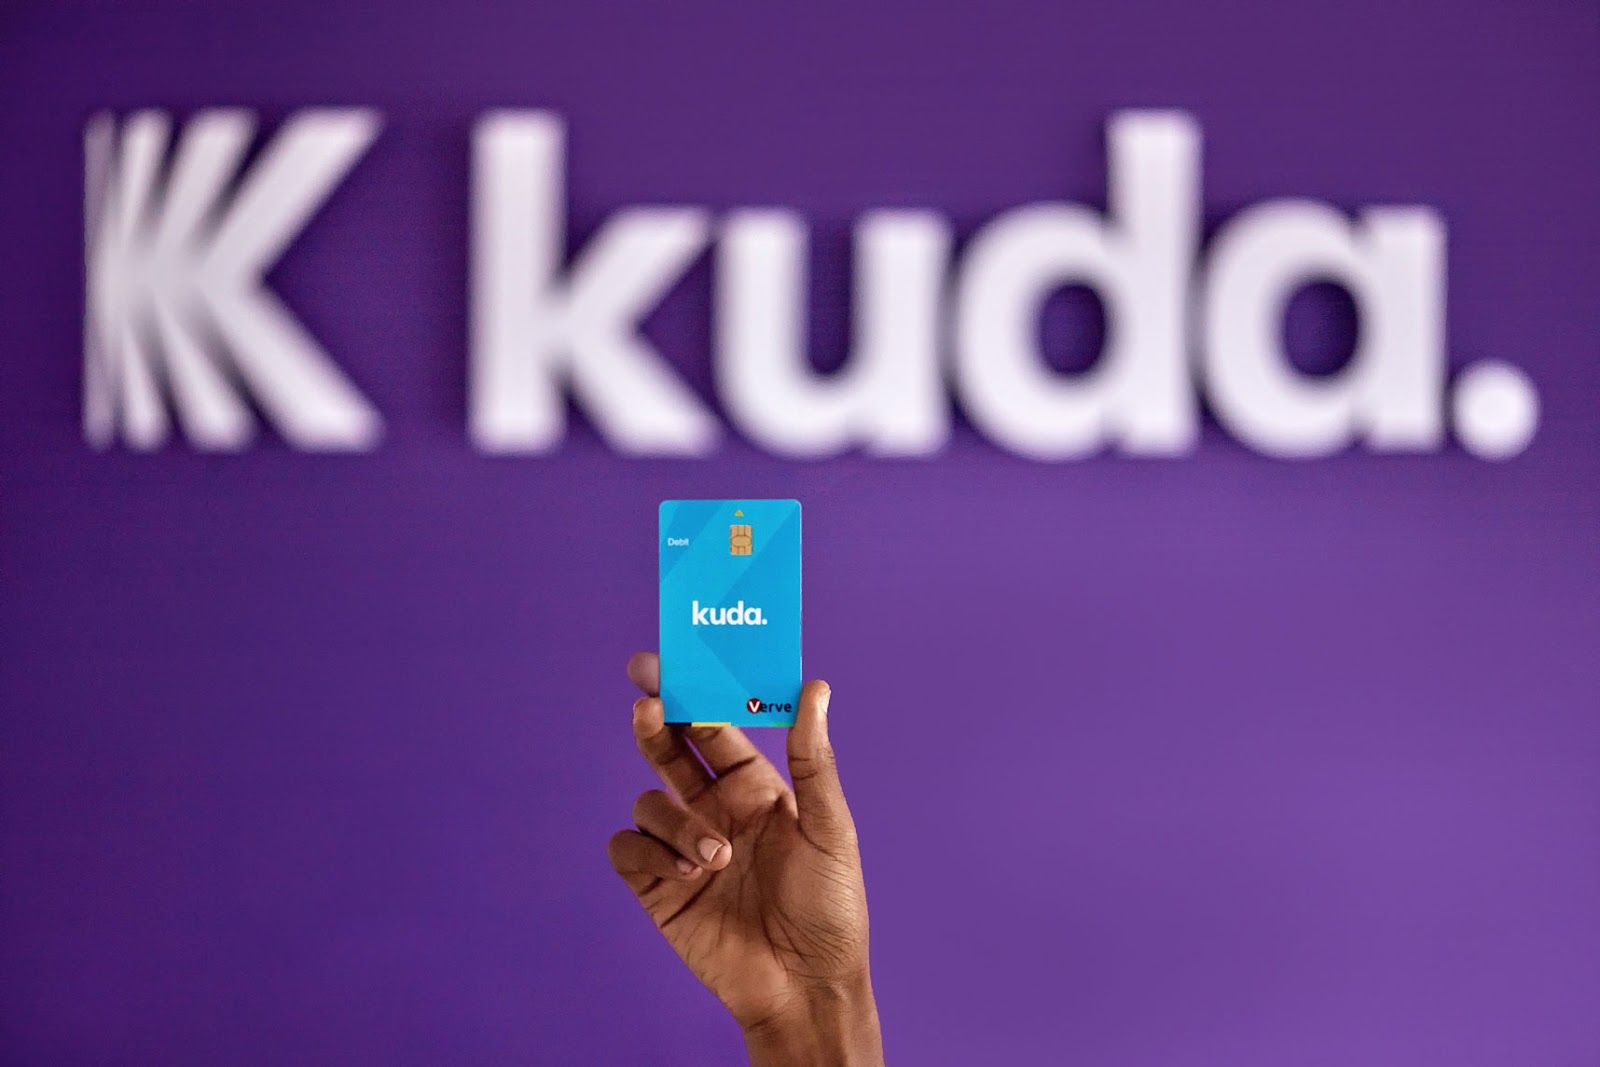 NIGERIAN FINTECH KUDA RAISES $25M, TO EXPAND TO OTHER AFRICAN COUNTRIES